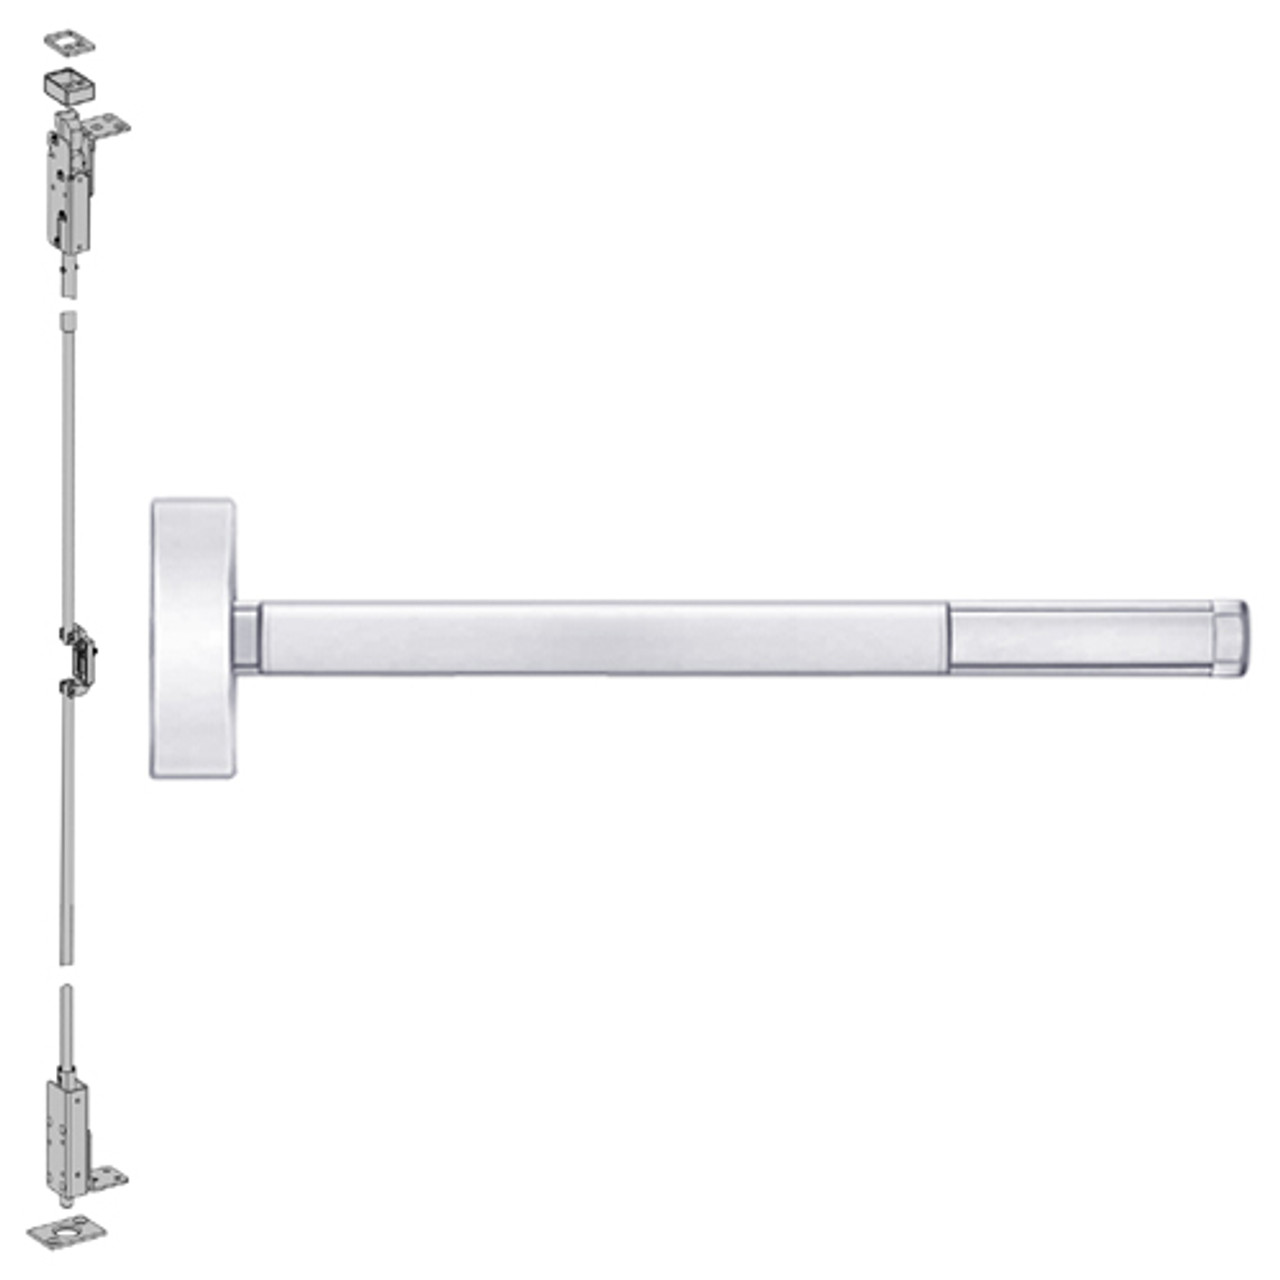 2702LBR-625-48 PHI 2700 Series Wood Door Concealed Vertical Rod Device Prepped for Dummy Trim with Less Bottom Rod in Bright Chrome Finish